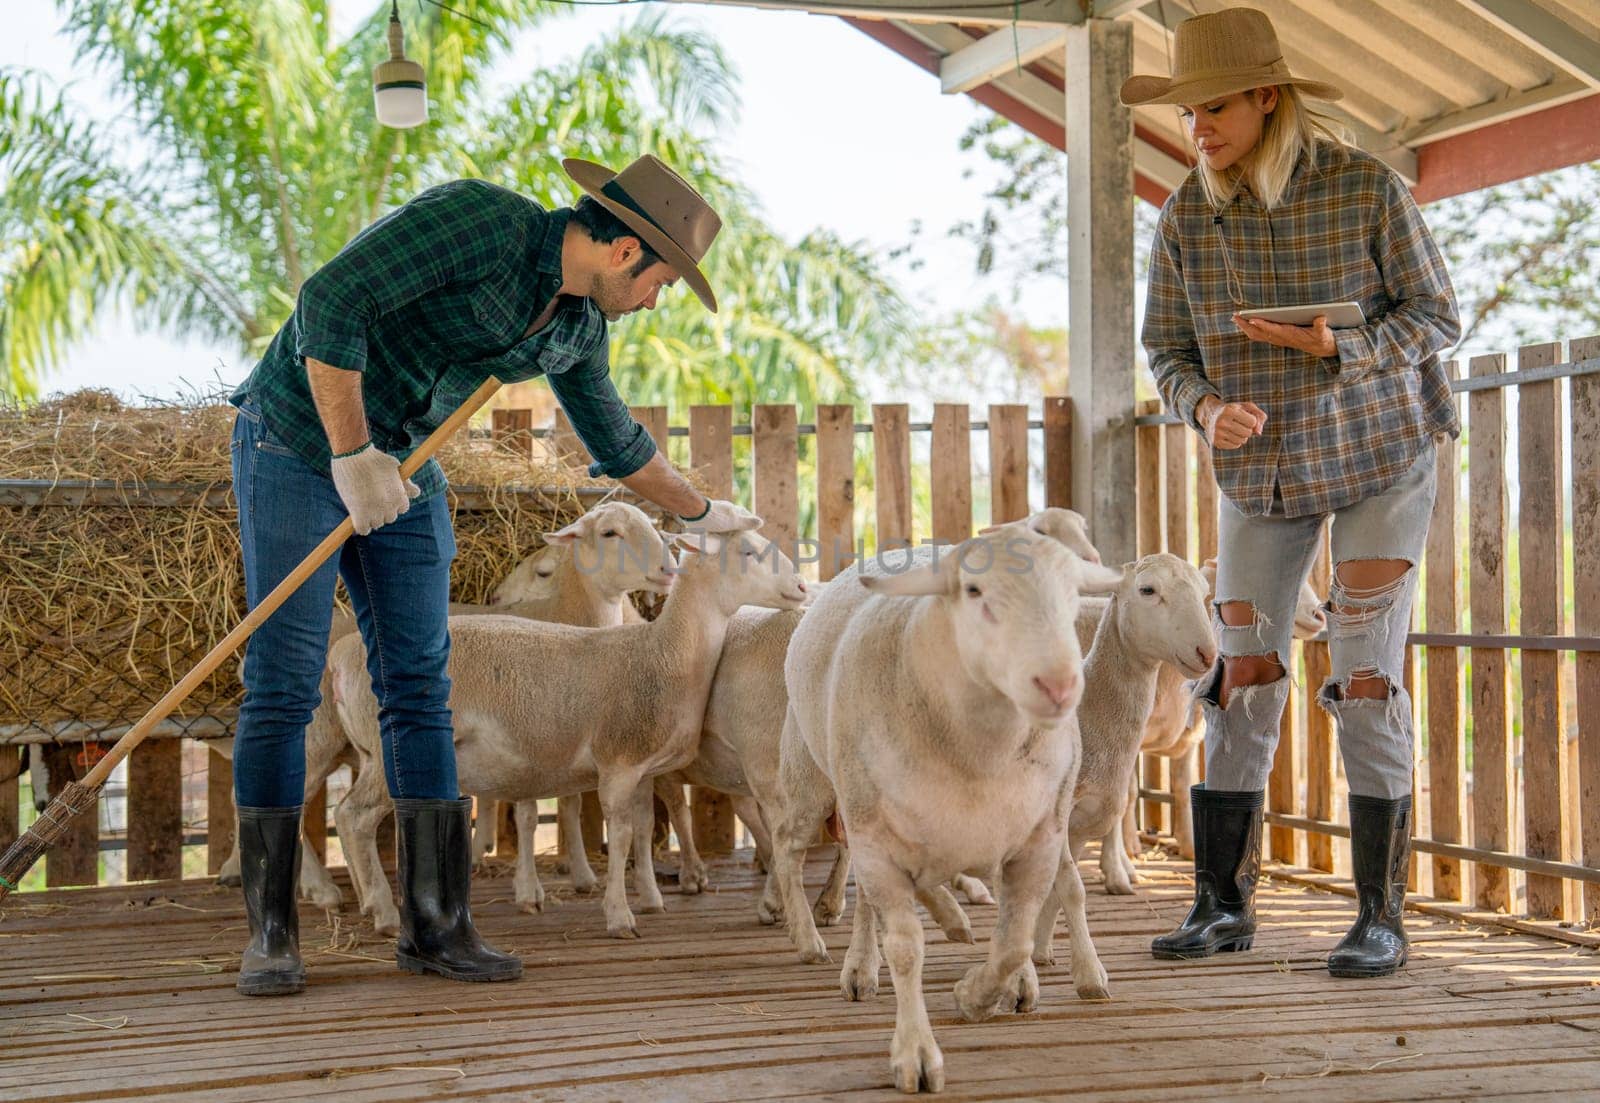 Caucasian man and woman farmers work together with man use bloom to clean stable and woman use tablet to check and take care sheep in concept of smart farming.